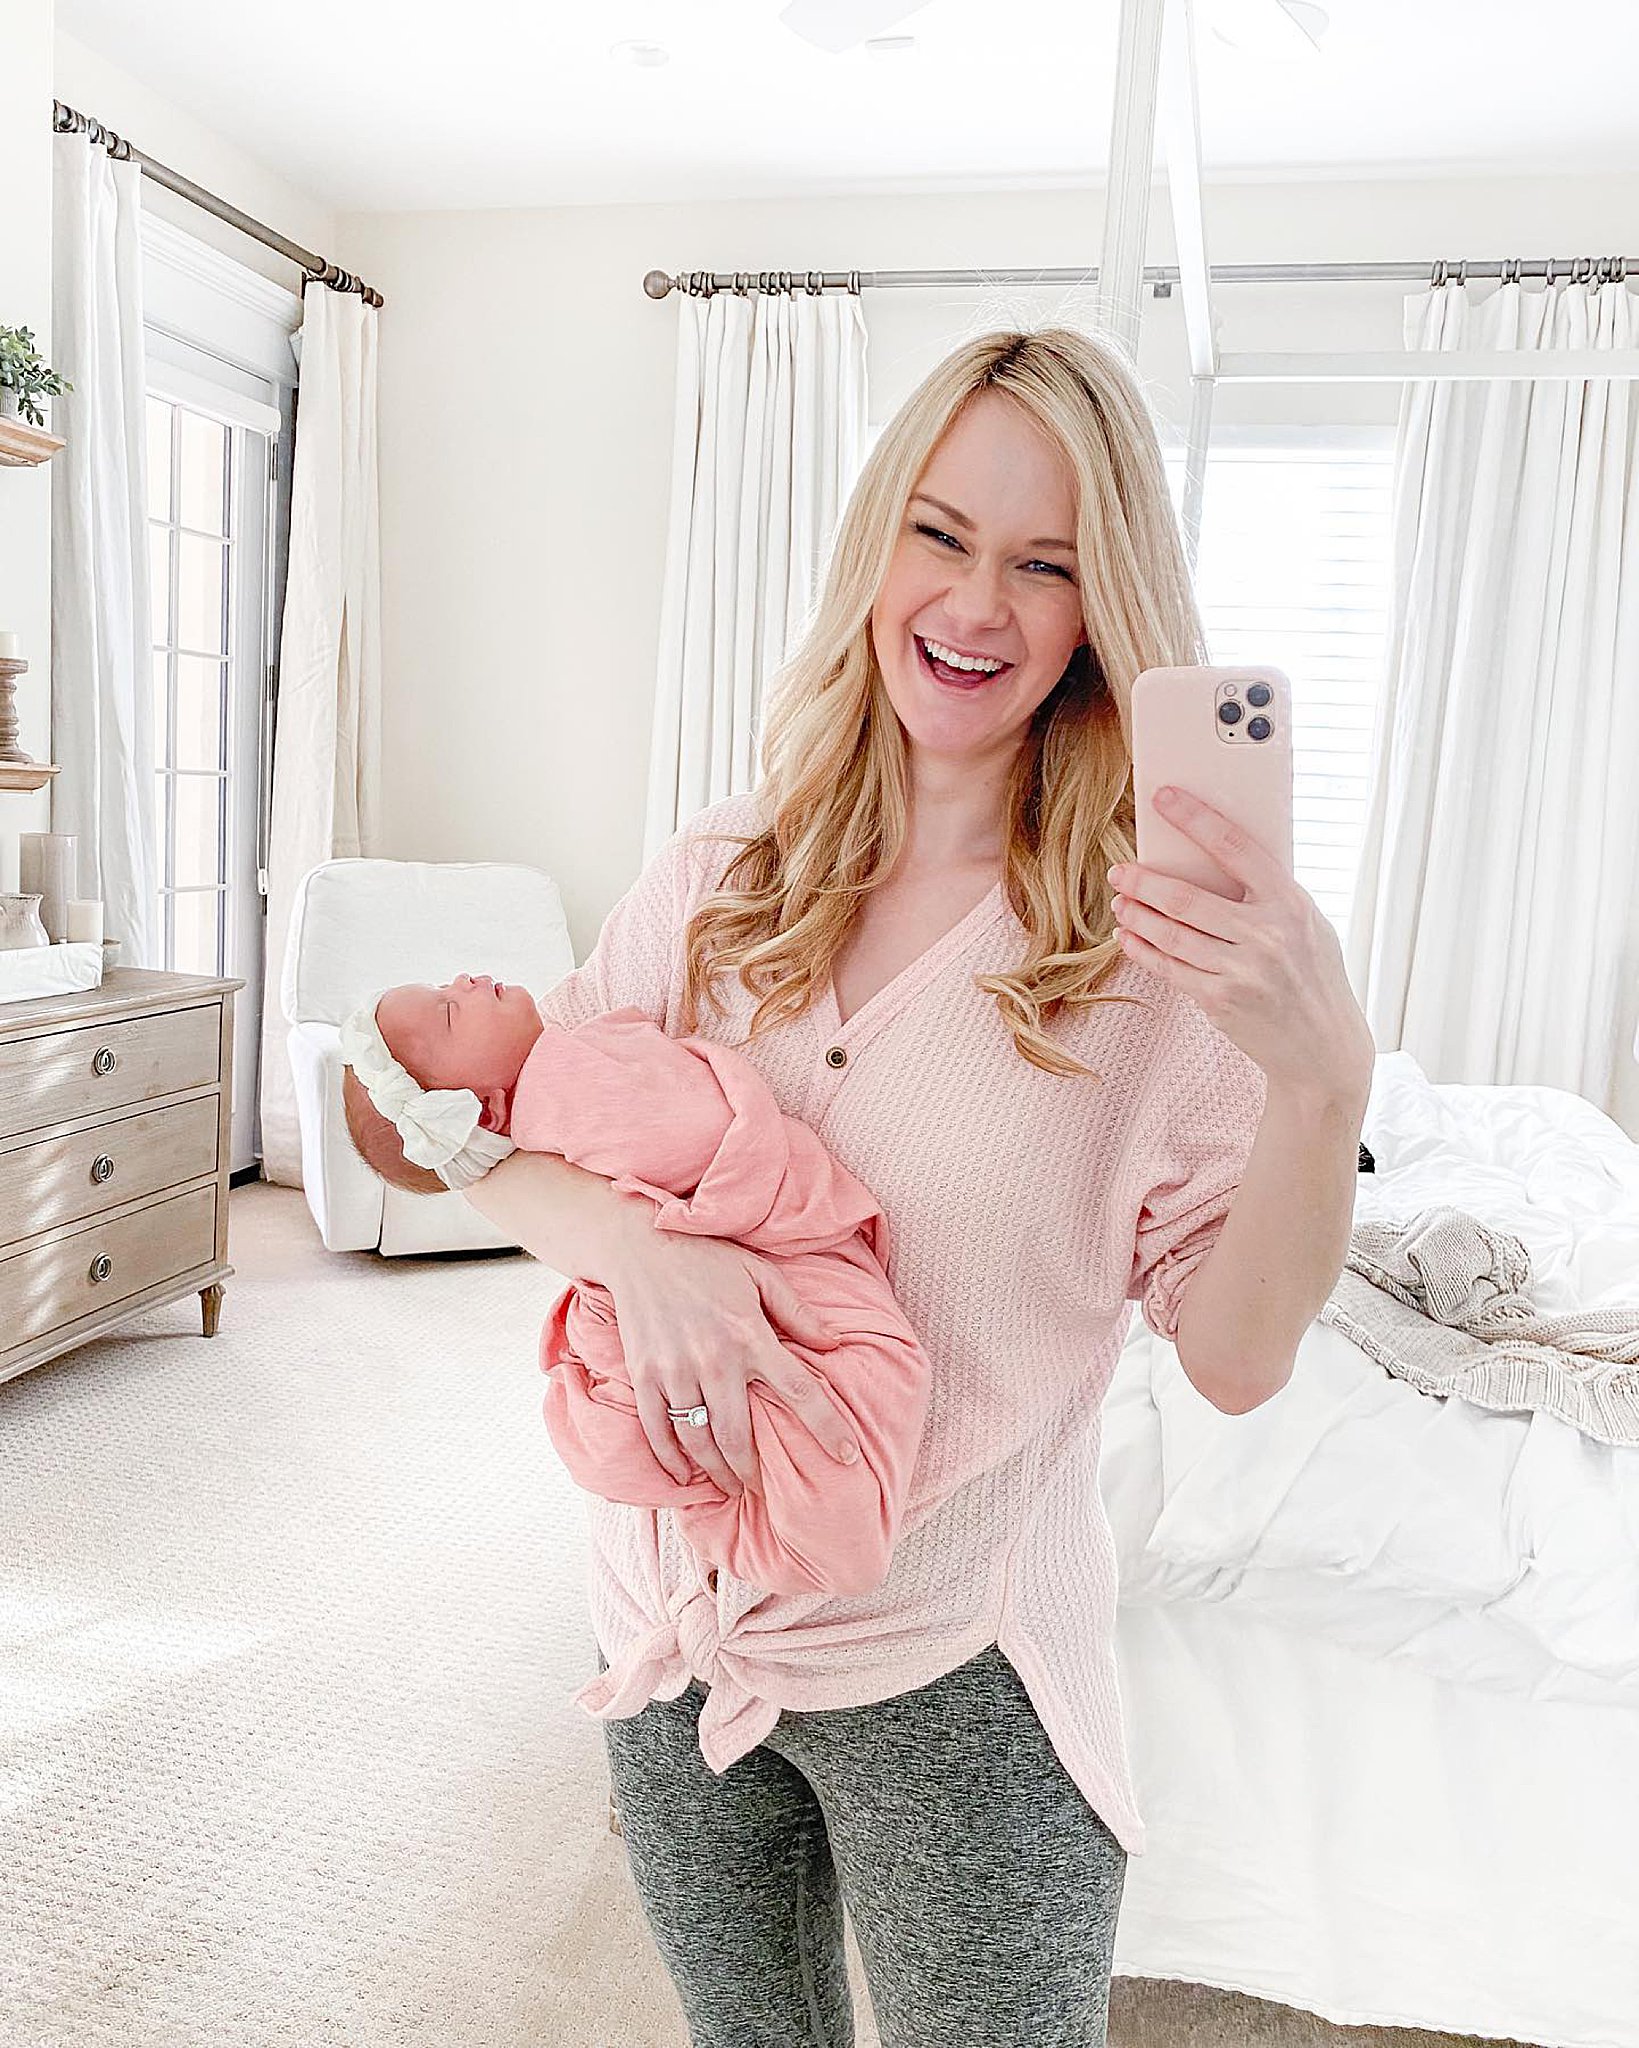 5 Comfy and Nursing-friendly Postpartum Outfits - Easy Fashion for Moms